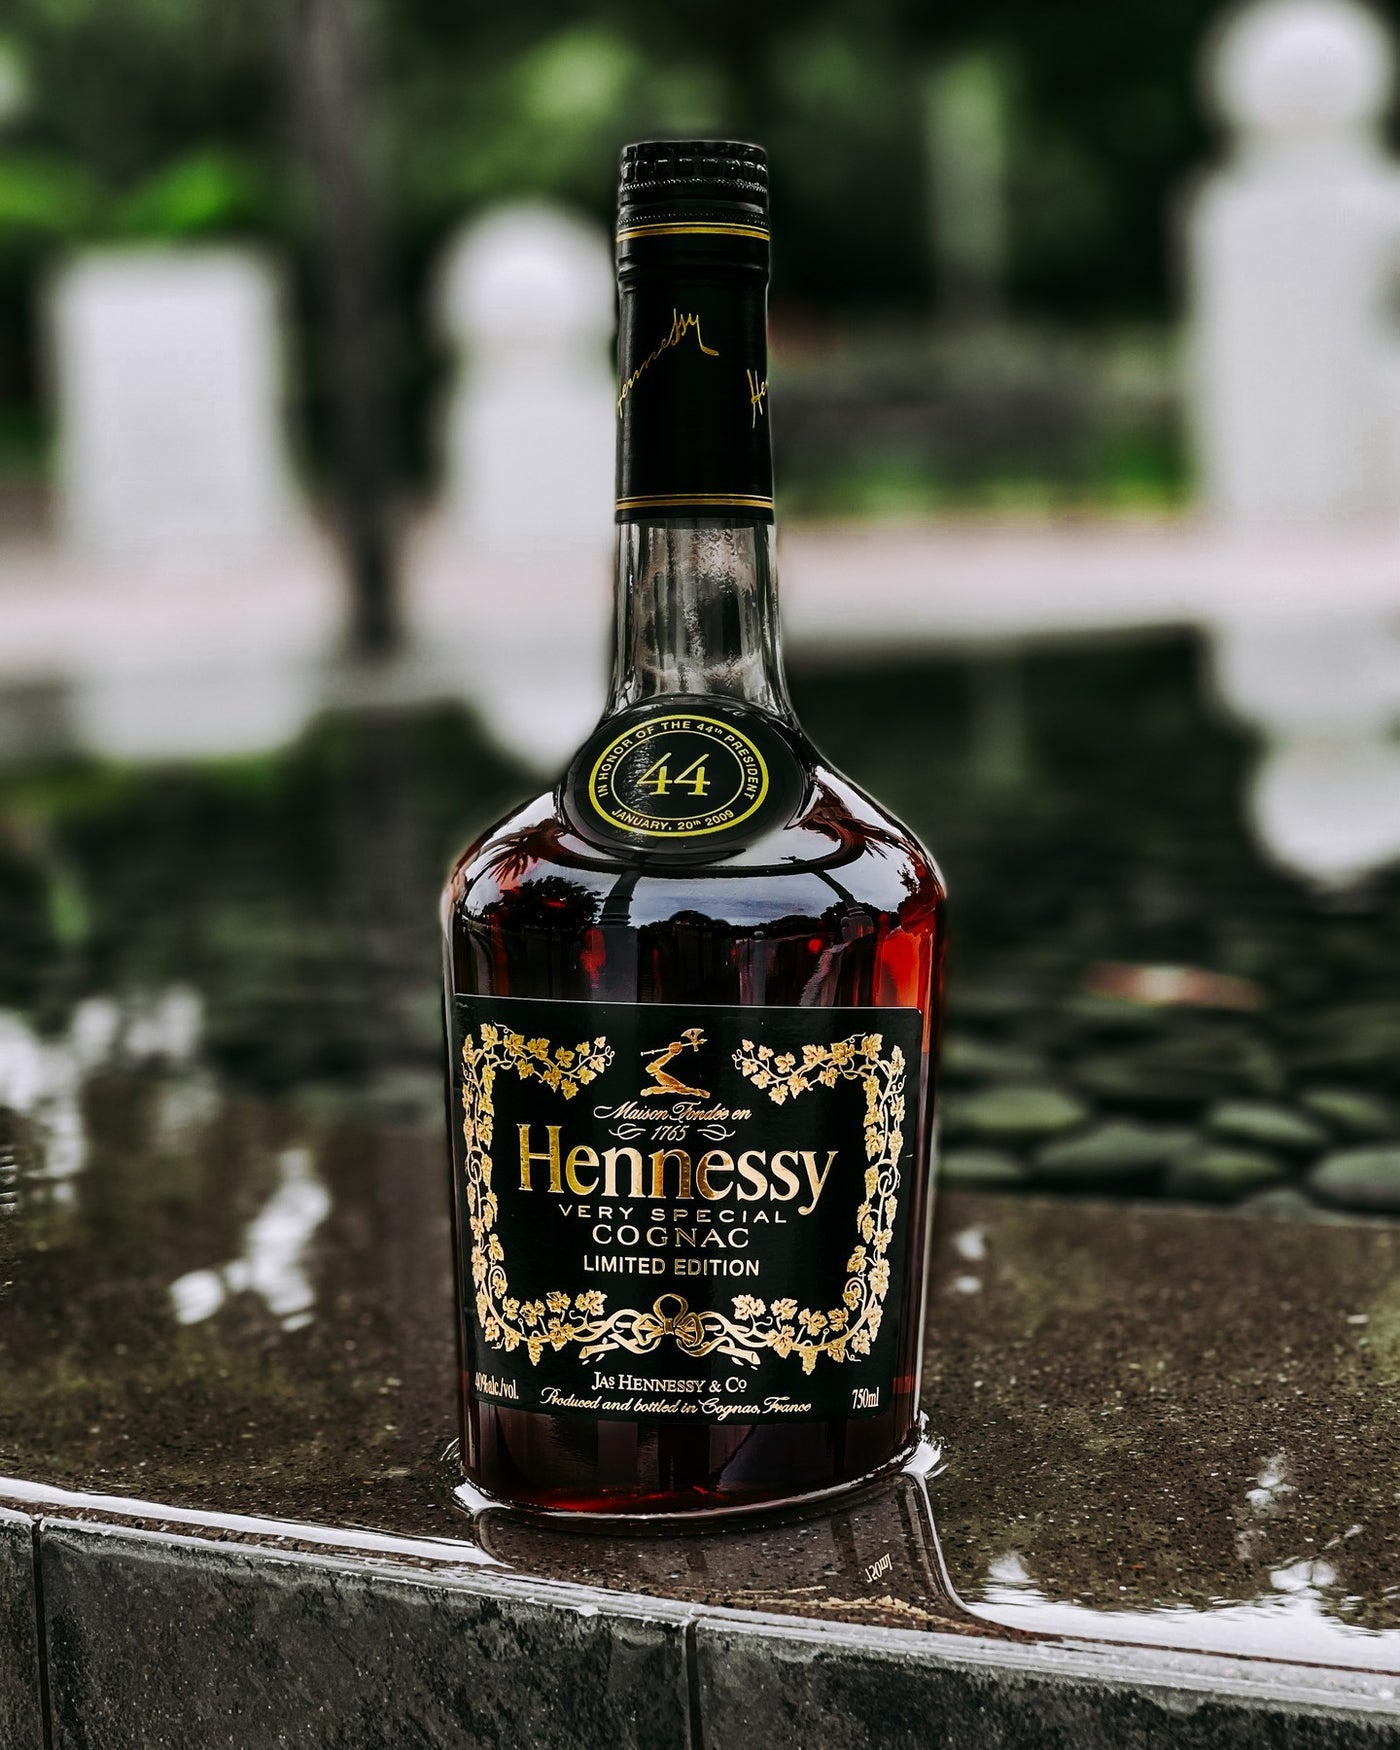 BUY] Hennessy Obama 44th Presidential Collector Edition at